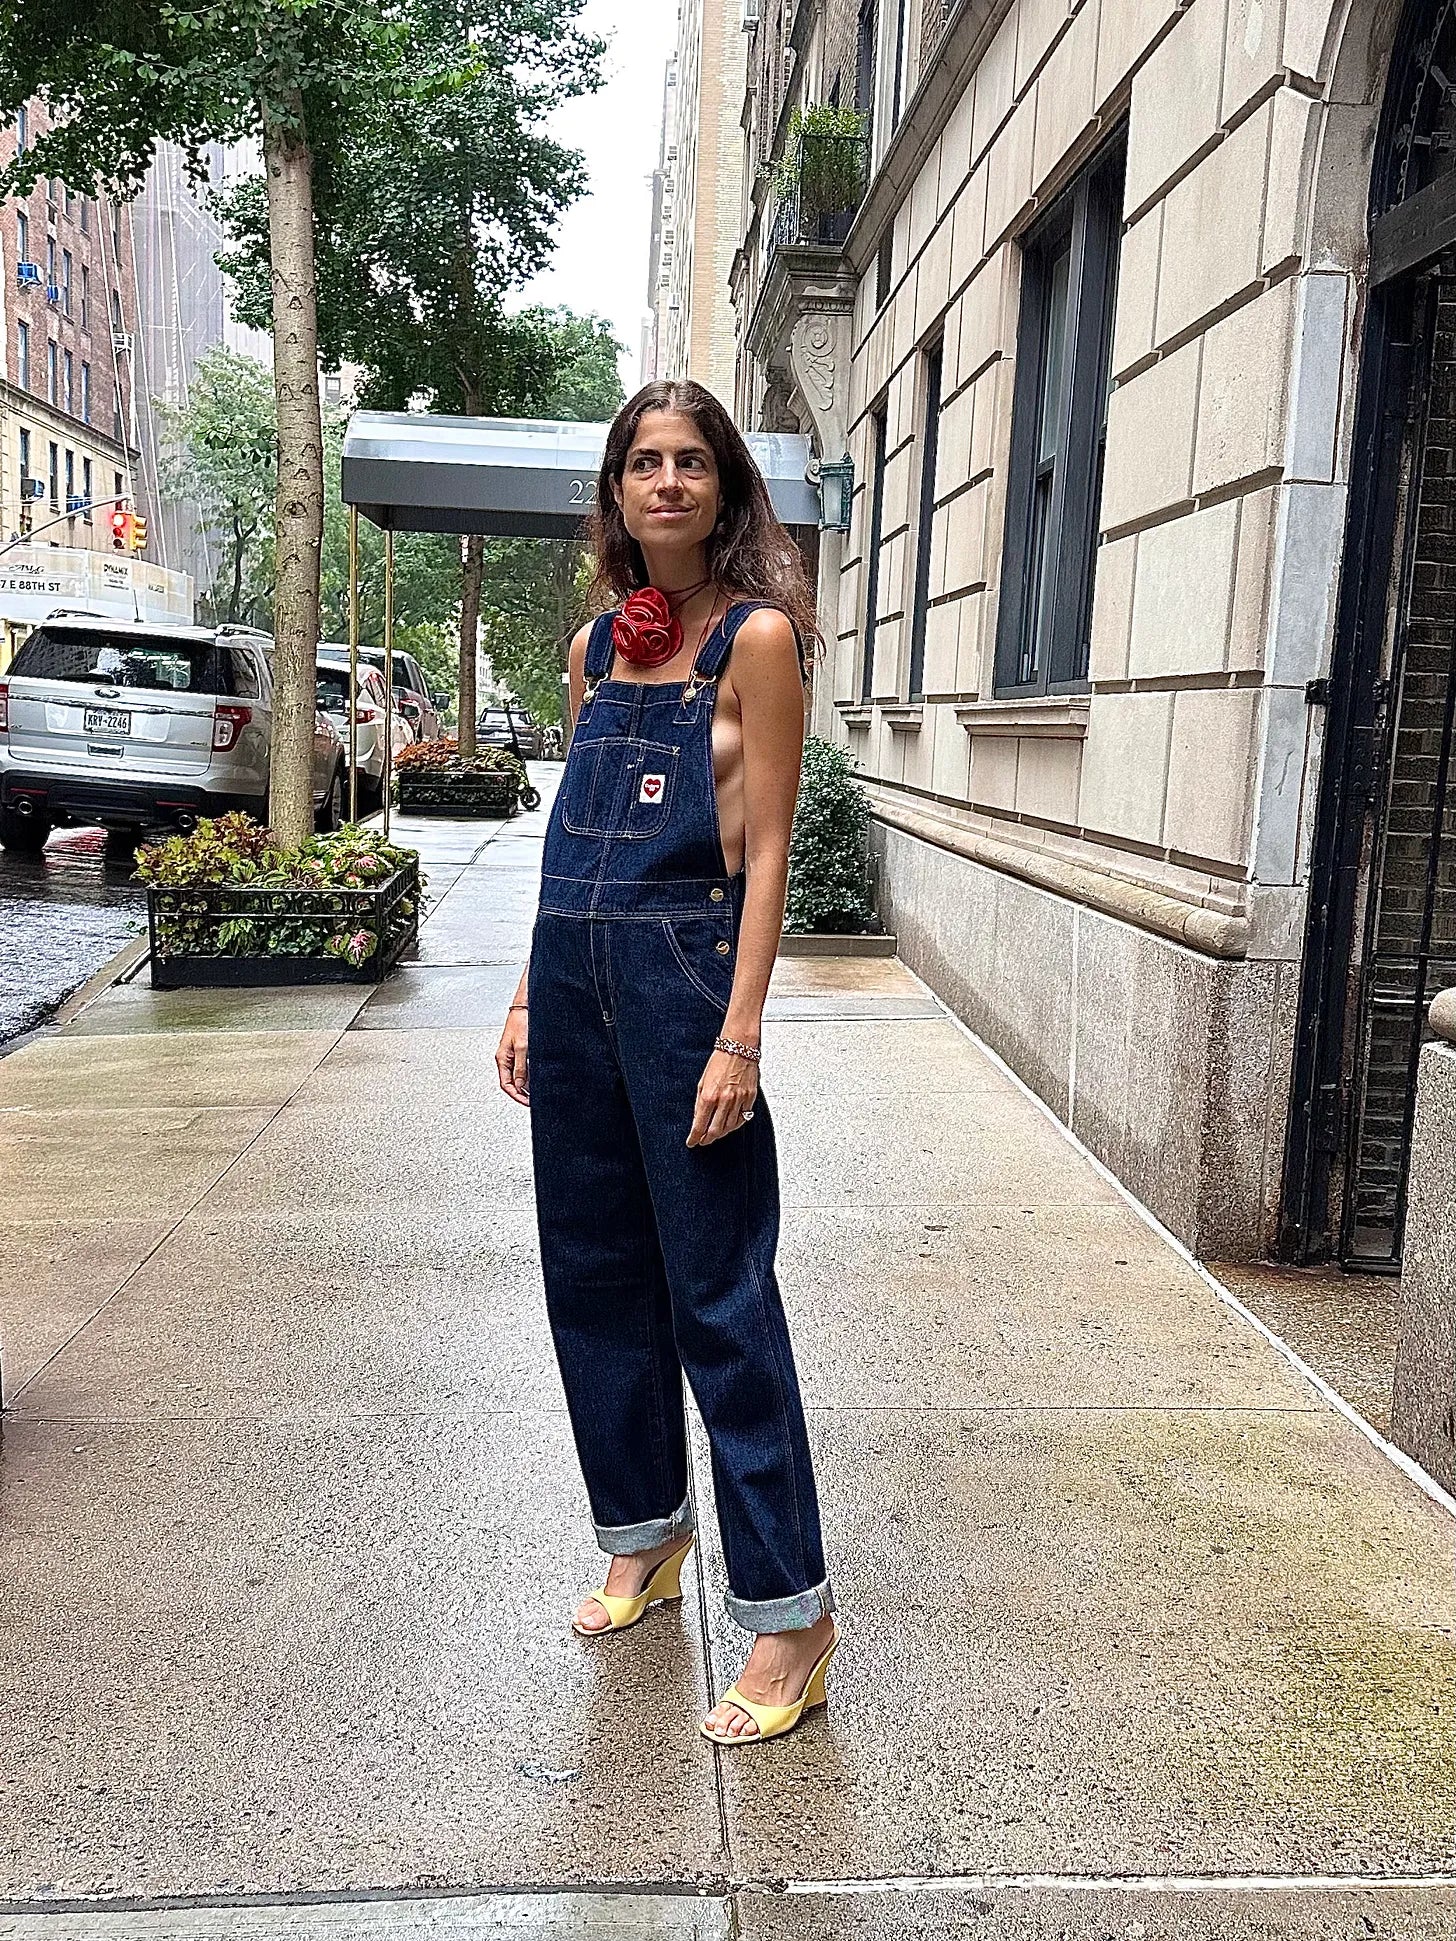 What to wear right now? How about a pair of overalls